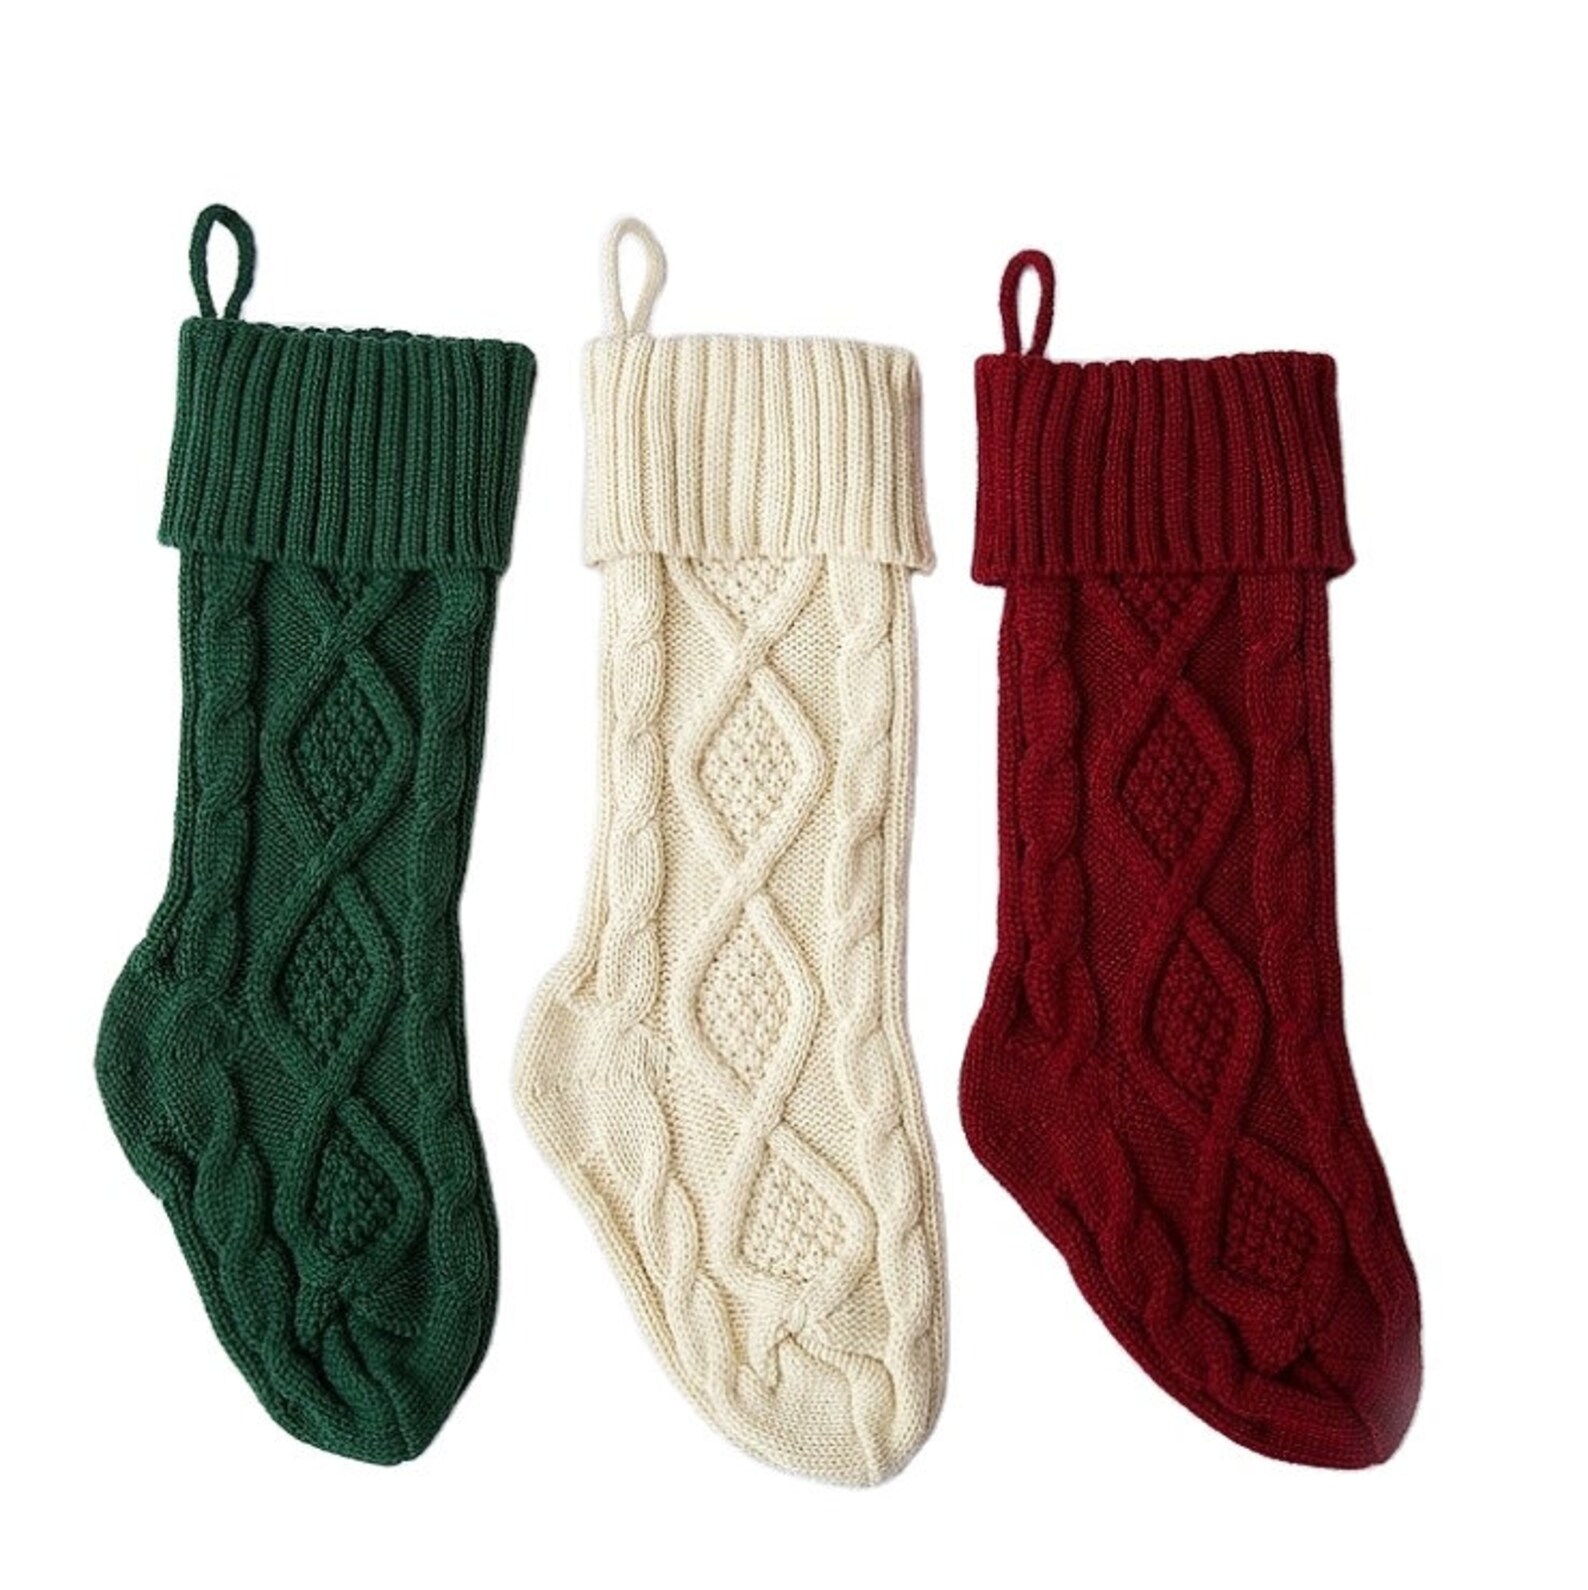 Large Knitted Christmas Stockings | Etsy